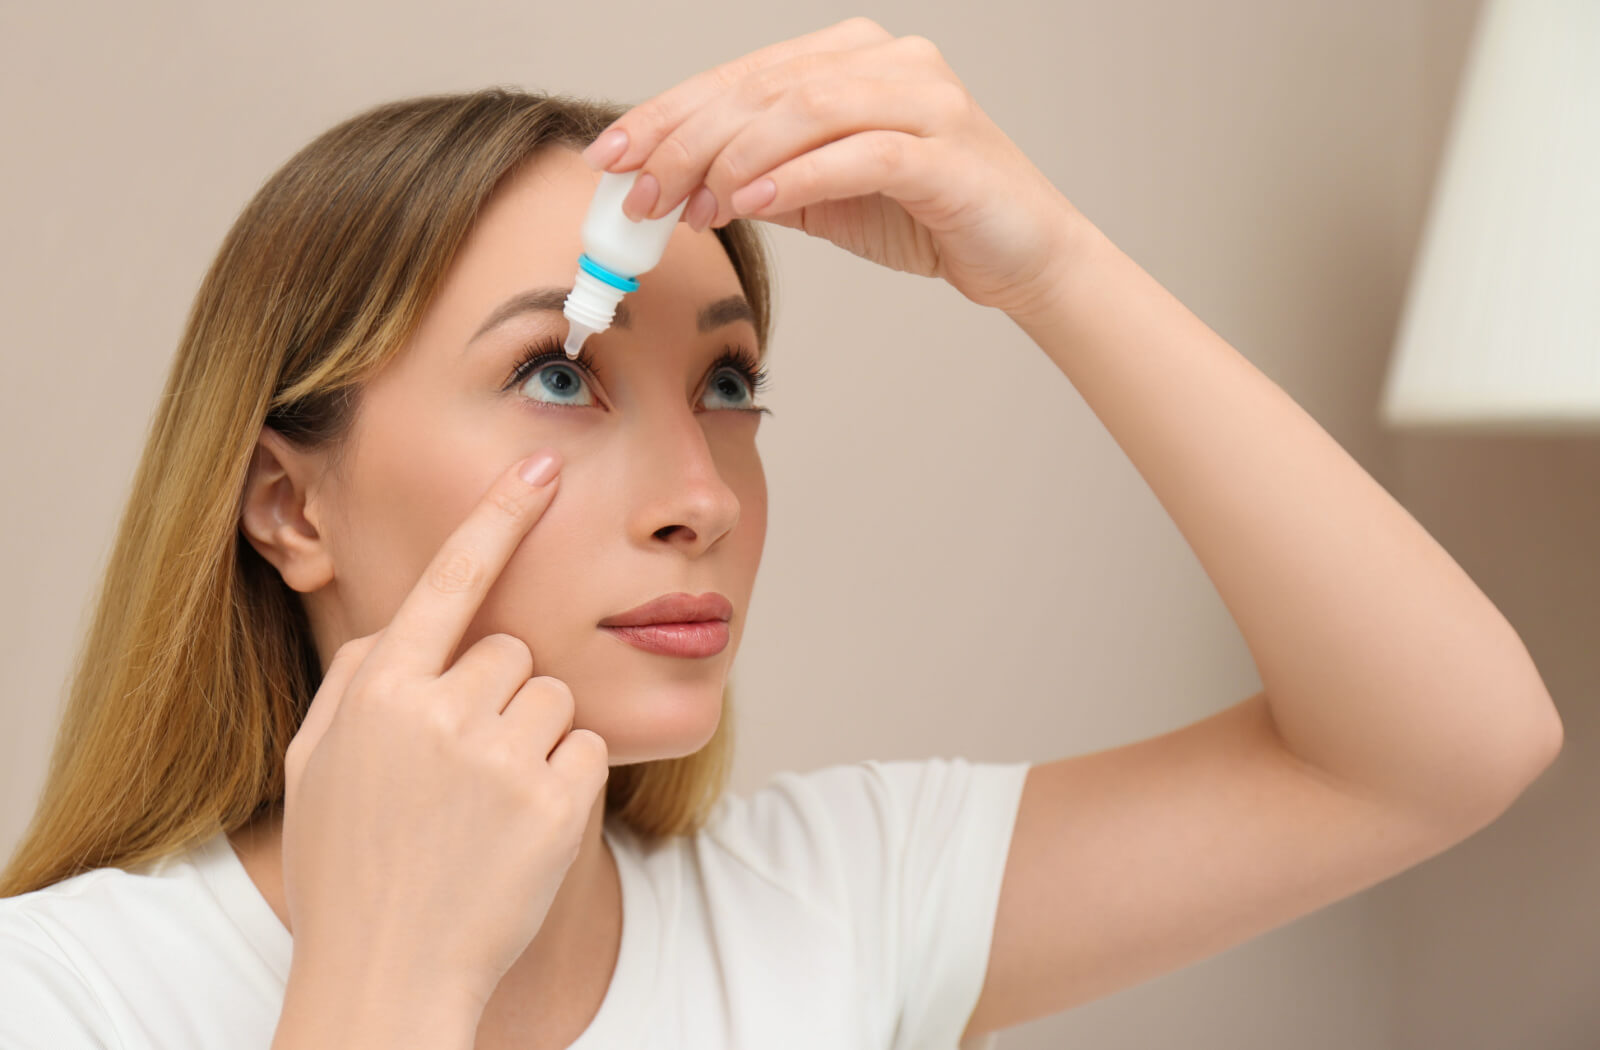 A young woman pulling her right lower eyelid down to apply eye drops while standing against a beige background.